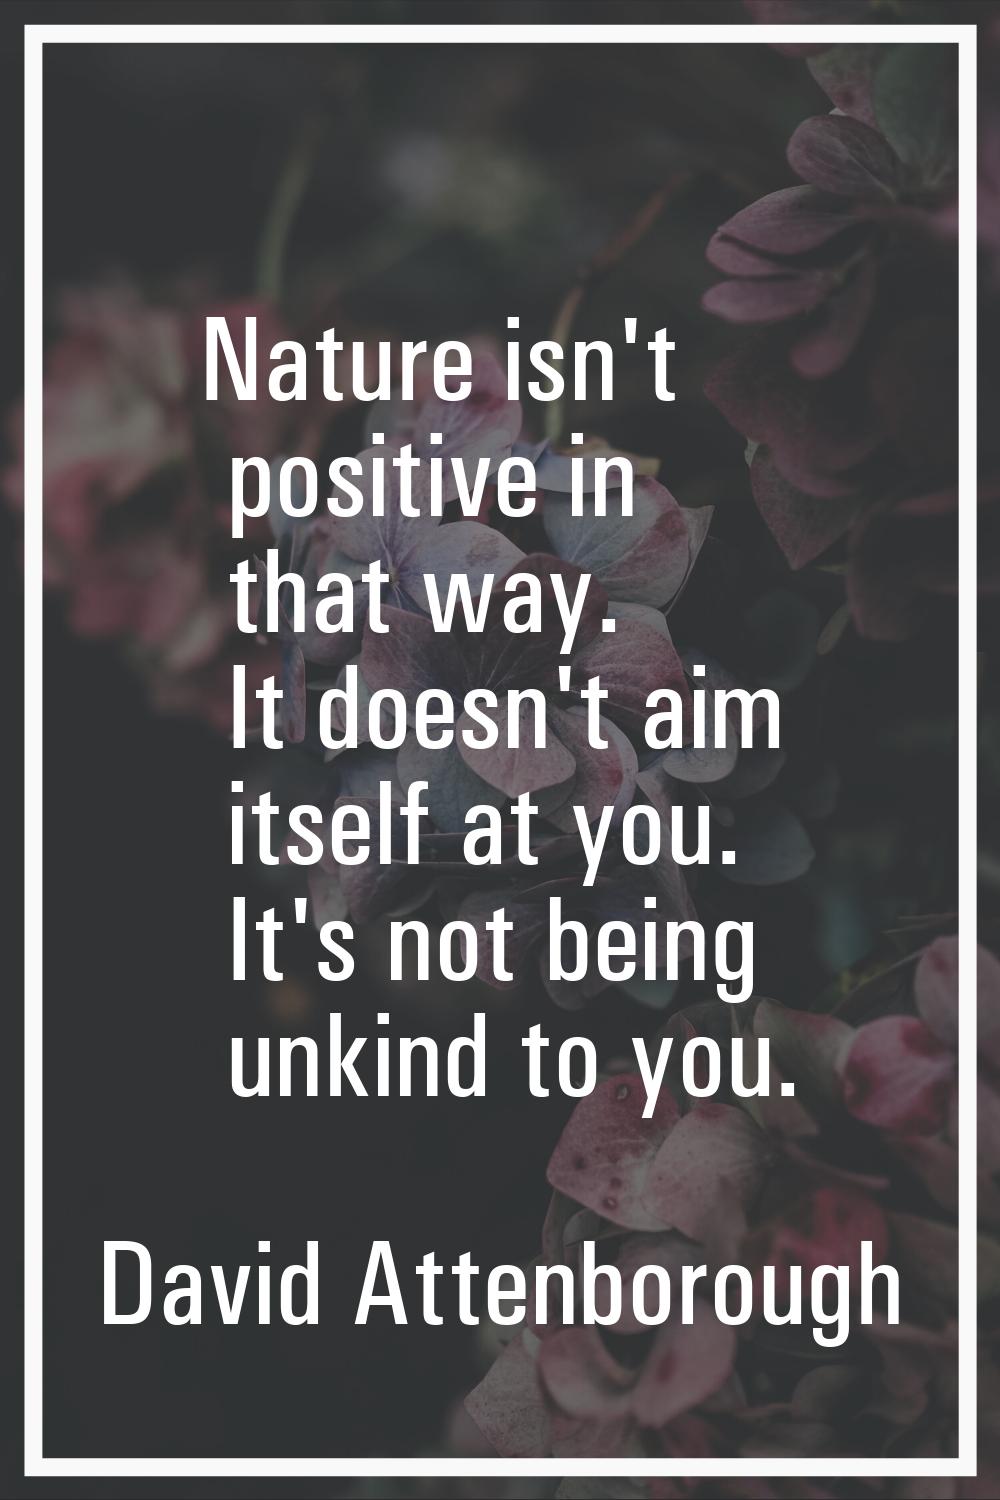 Nature isn't positive in that way. It doesn't aim itself at you. It's not being unkind to you.